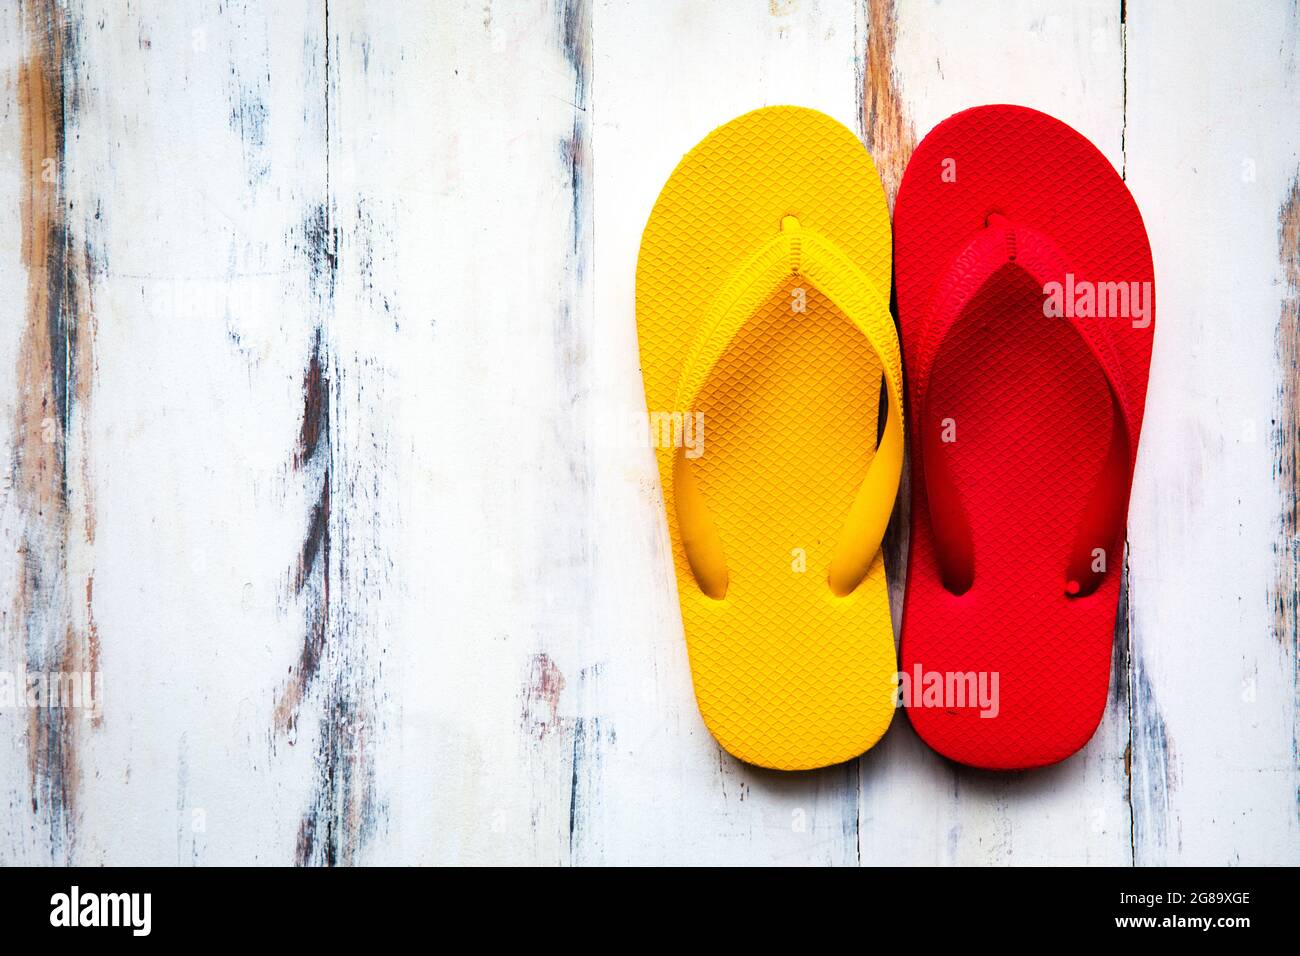 pair of and yellow rubber slippers popular use on a sand beach and tropical tourist destinations on wood background with sunlight and c Stock Photo - Alamy